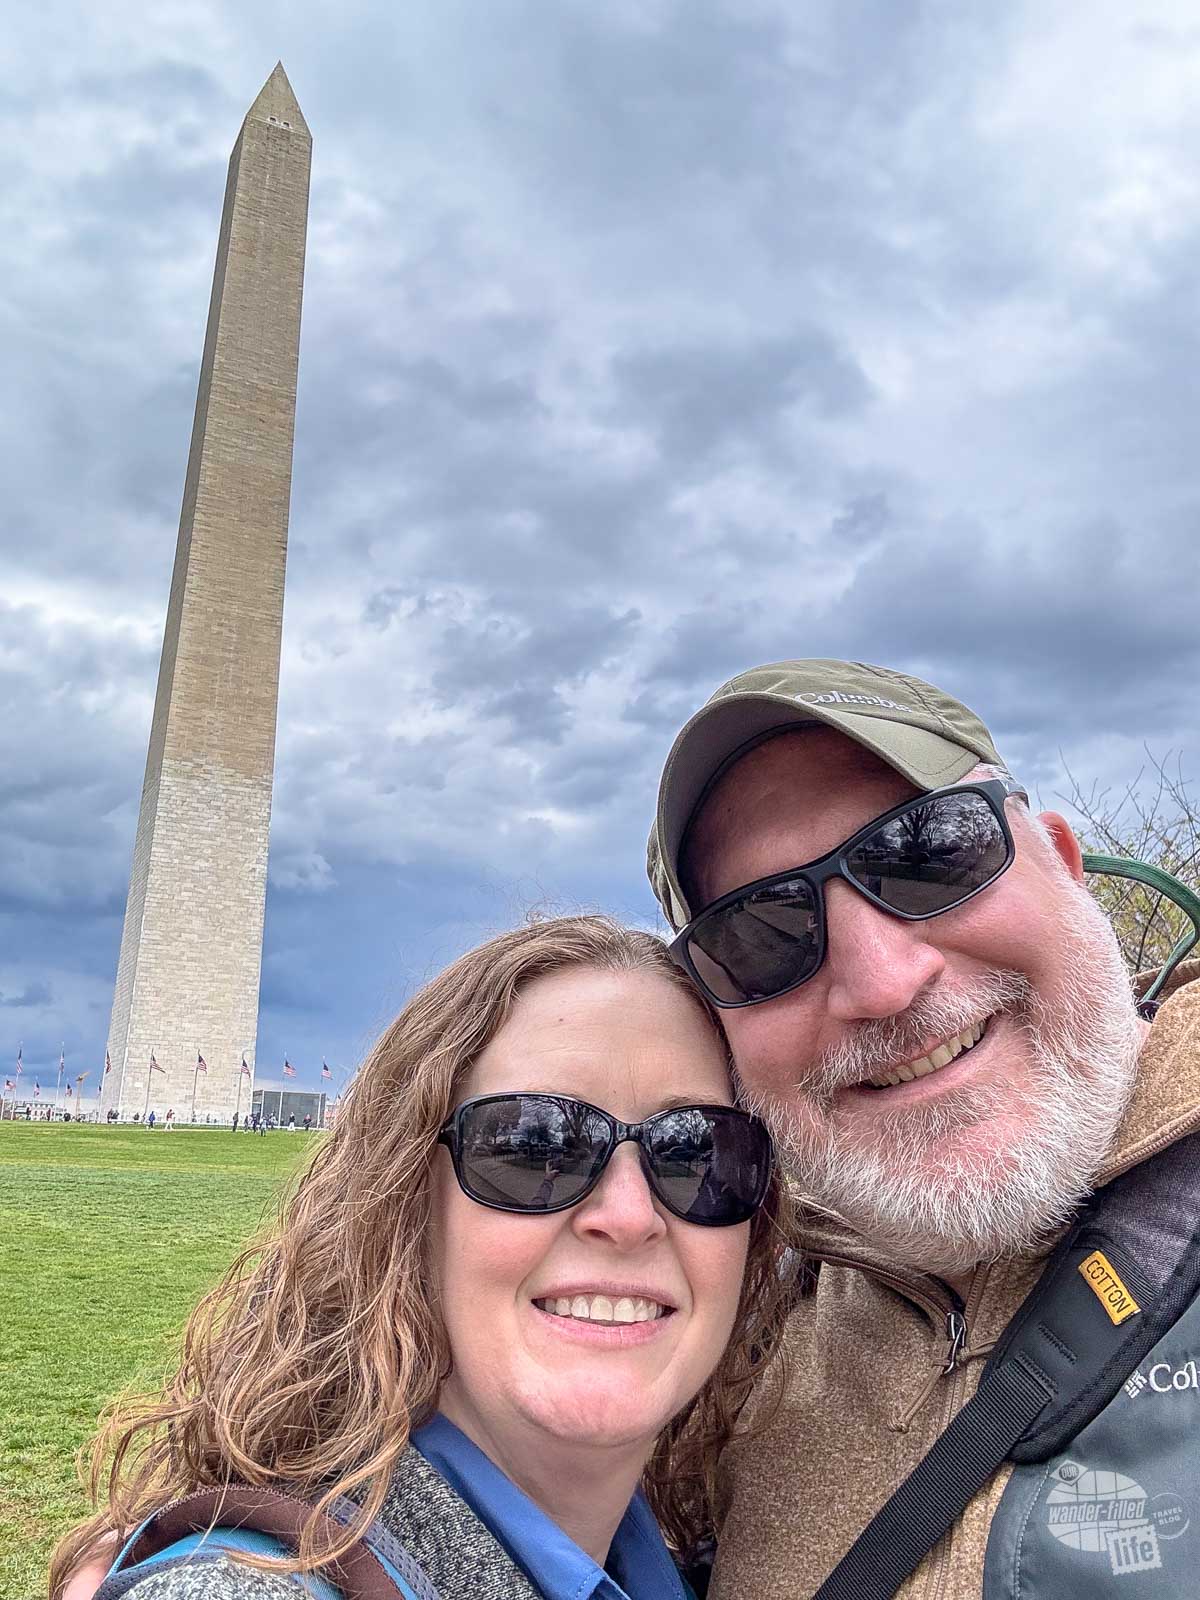 Bonnie and Grant on the National Mall in front of the Washington Monument